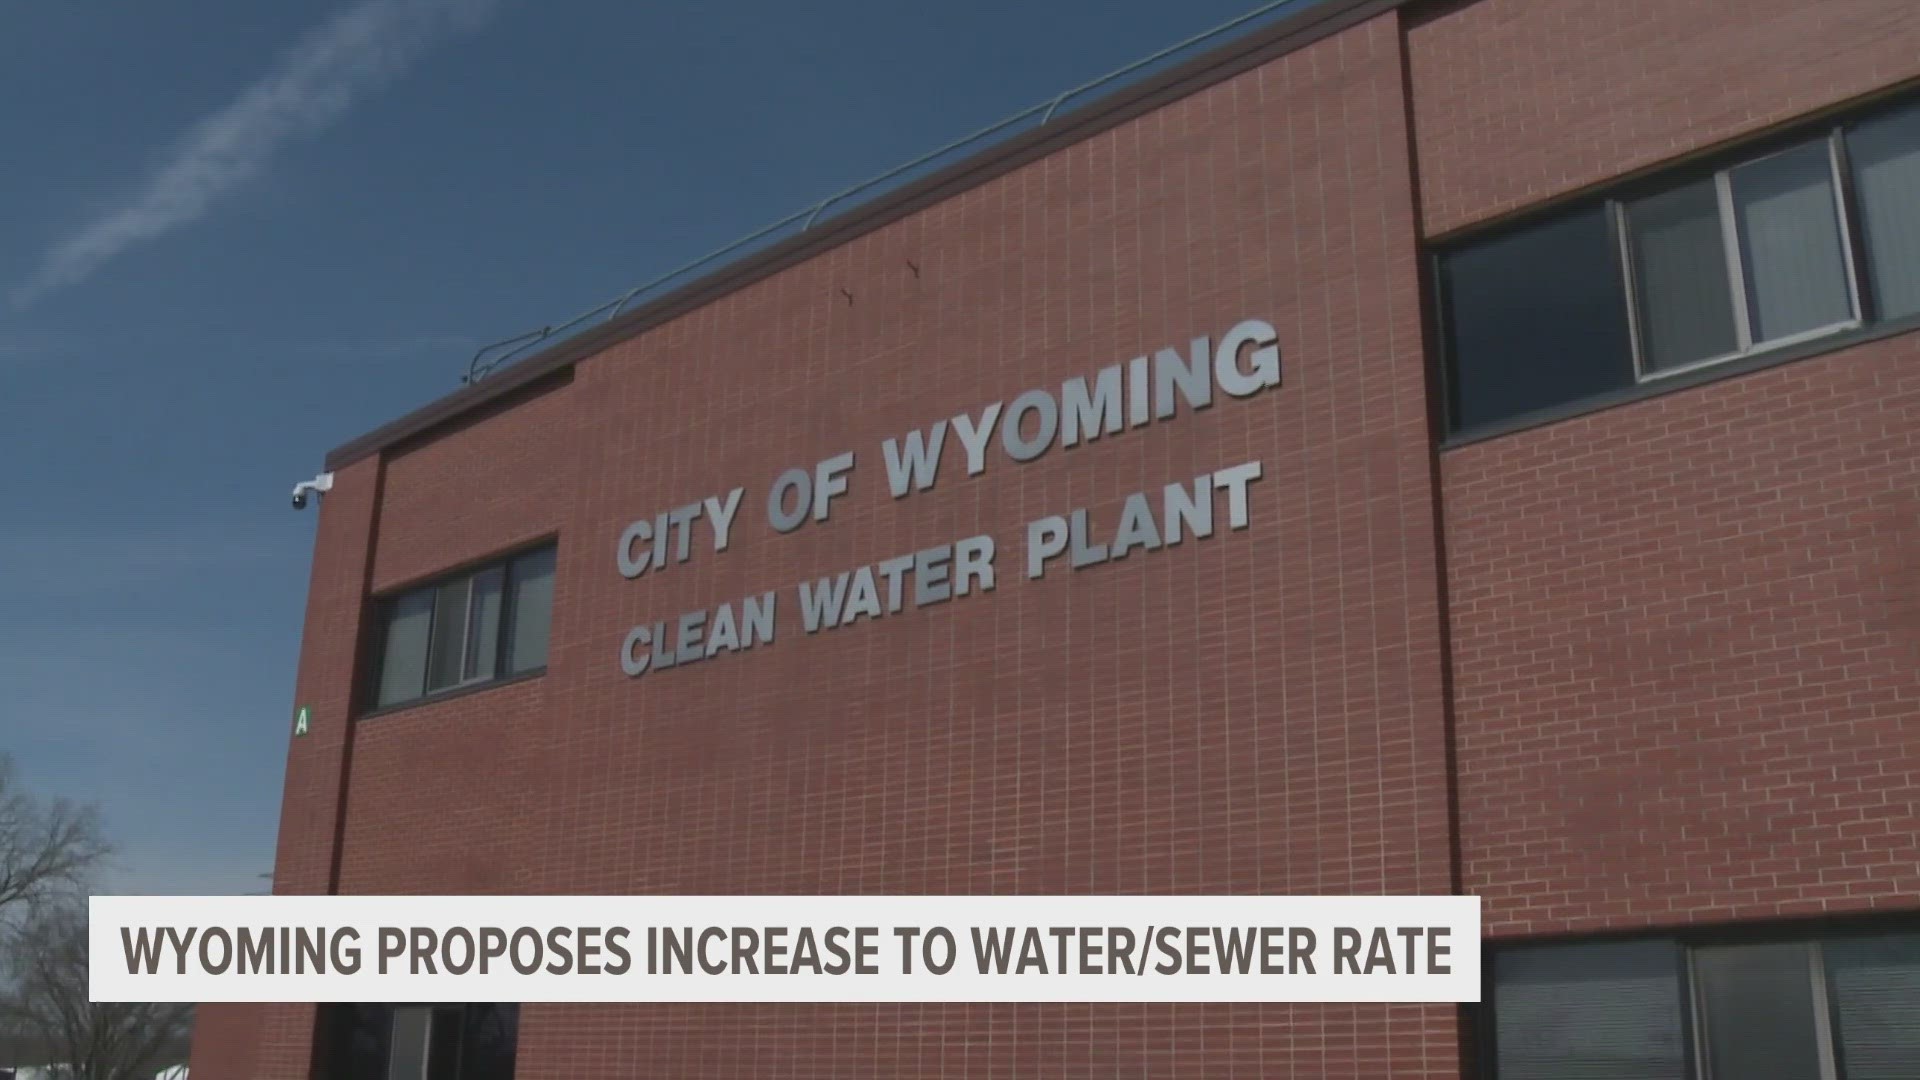 Wyoming is proposing 15% increases to commodity rates for both water and sewer, and 8% increases, for readiness to serve charges.